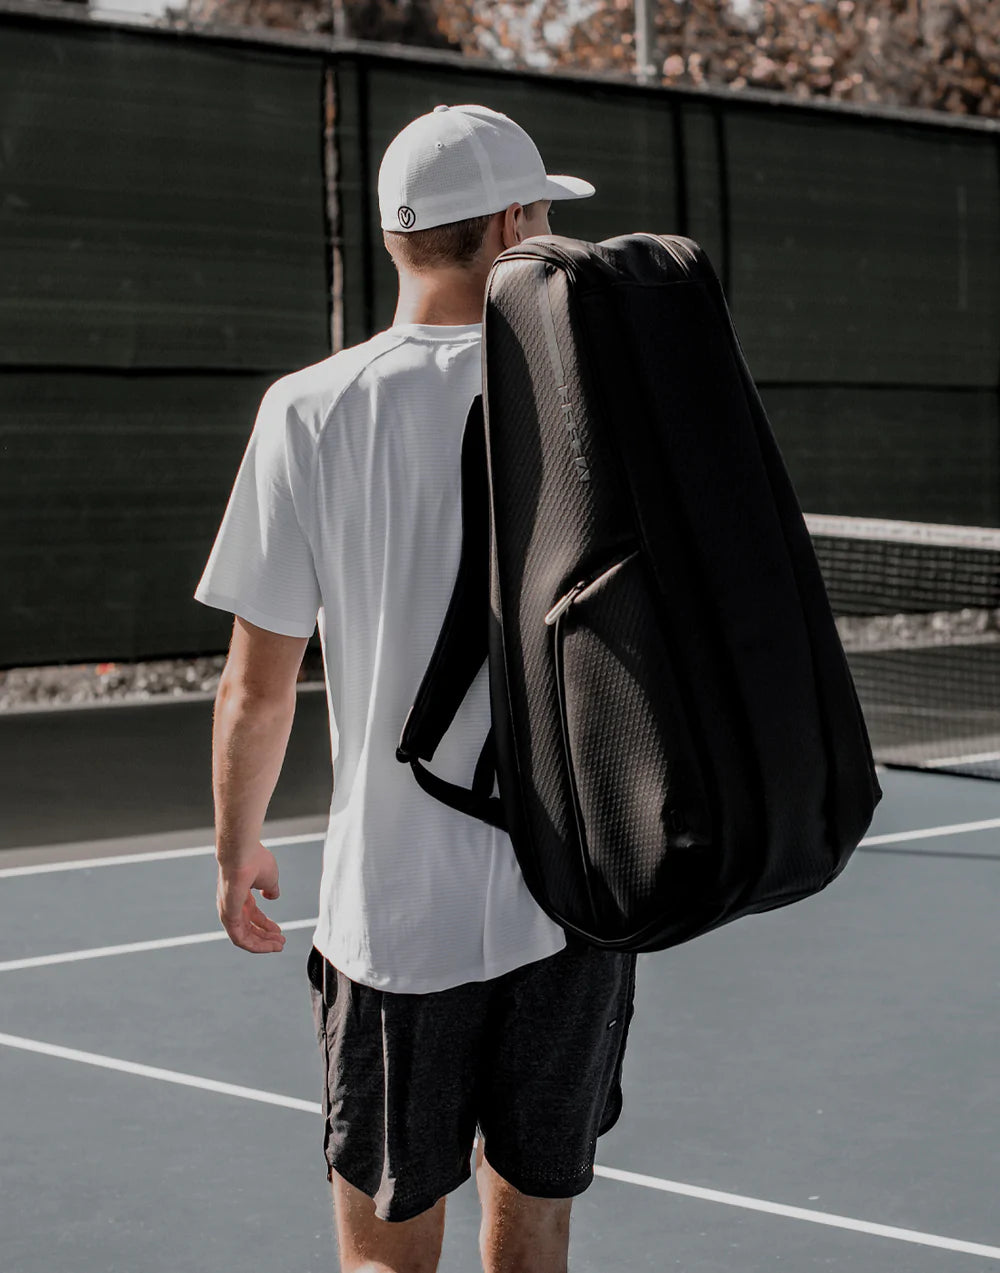 A man wearing a white hat and shirt carries a black tennis bag on his back on the tennis court